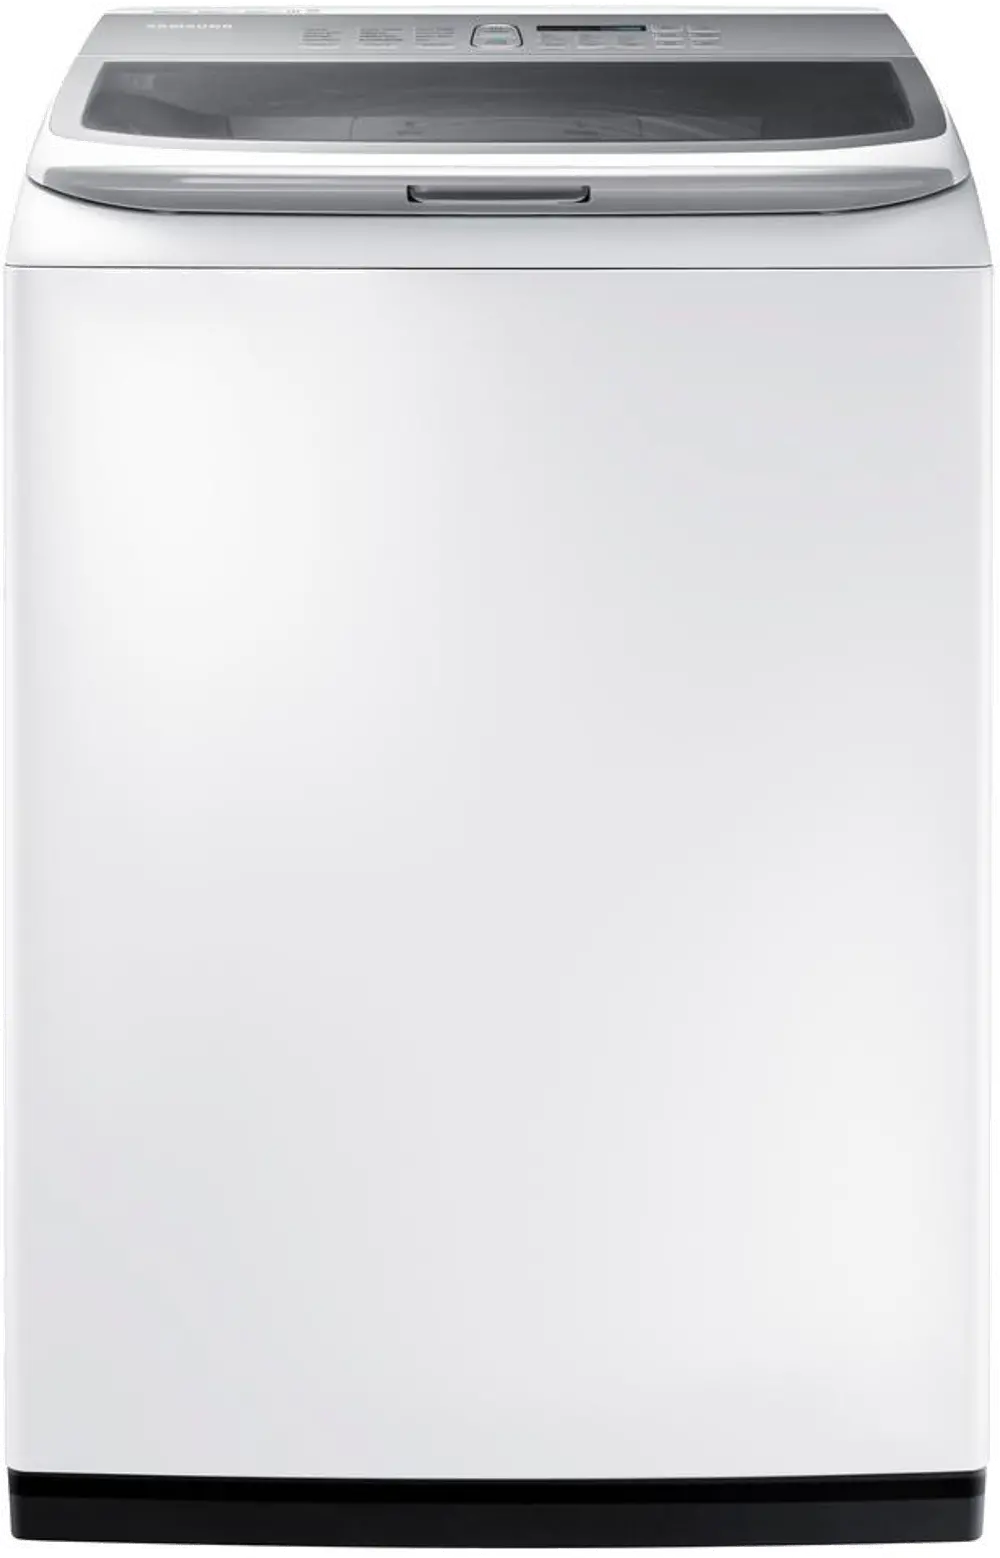 WA45K7100AW/SPECIAL Samsung White 4.5 cu. ft. Mid-Control Top Load Washer-1